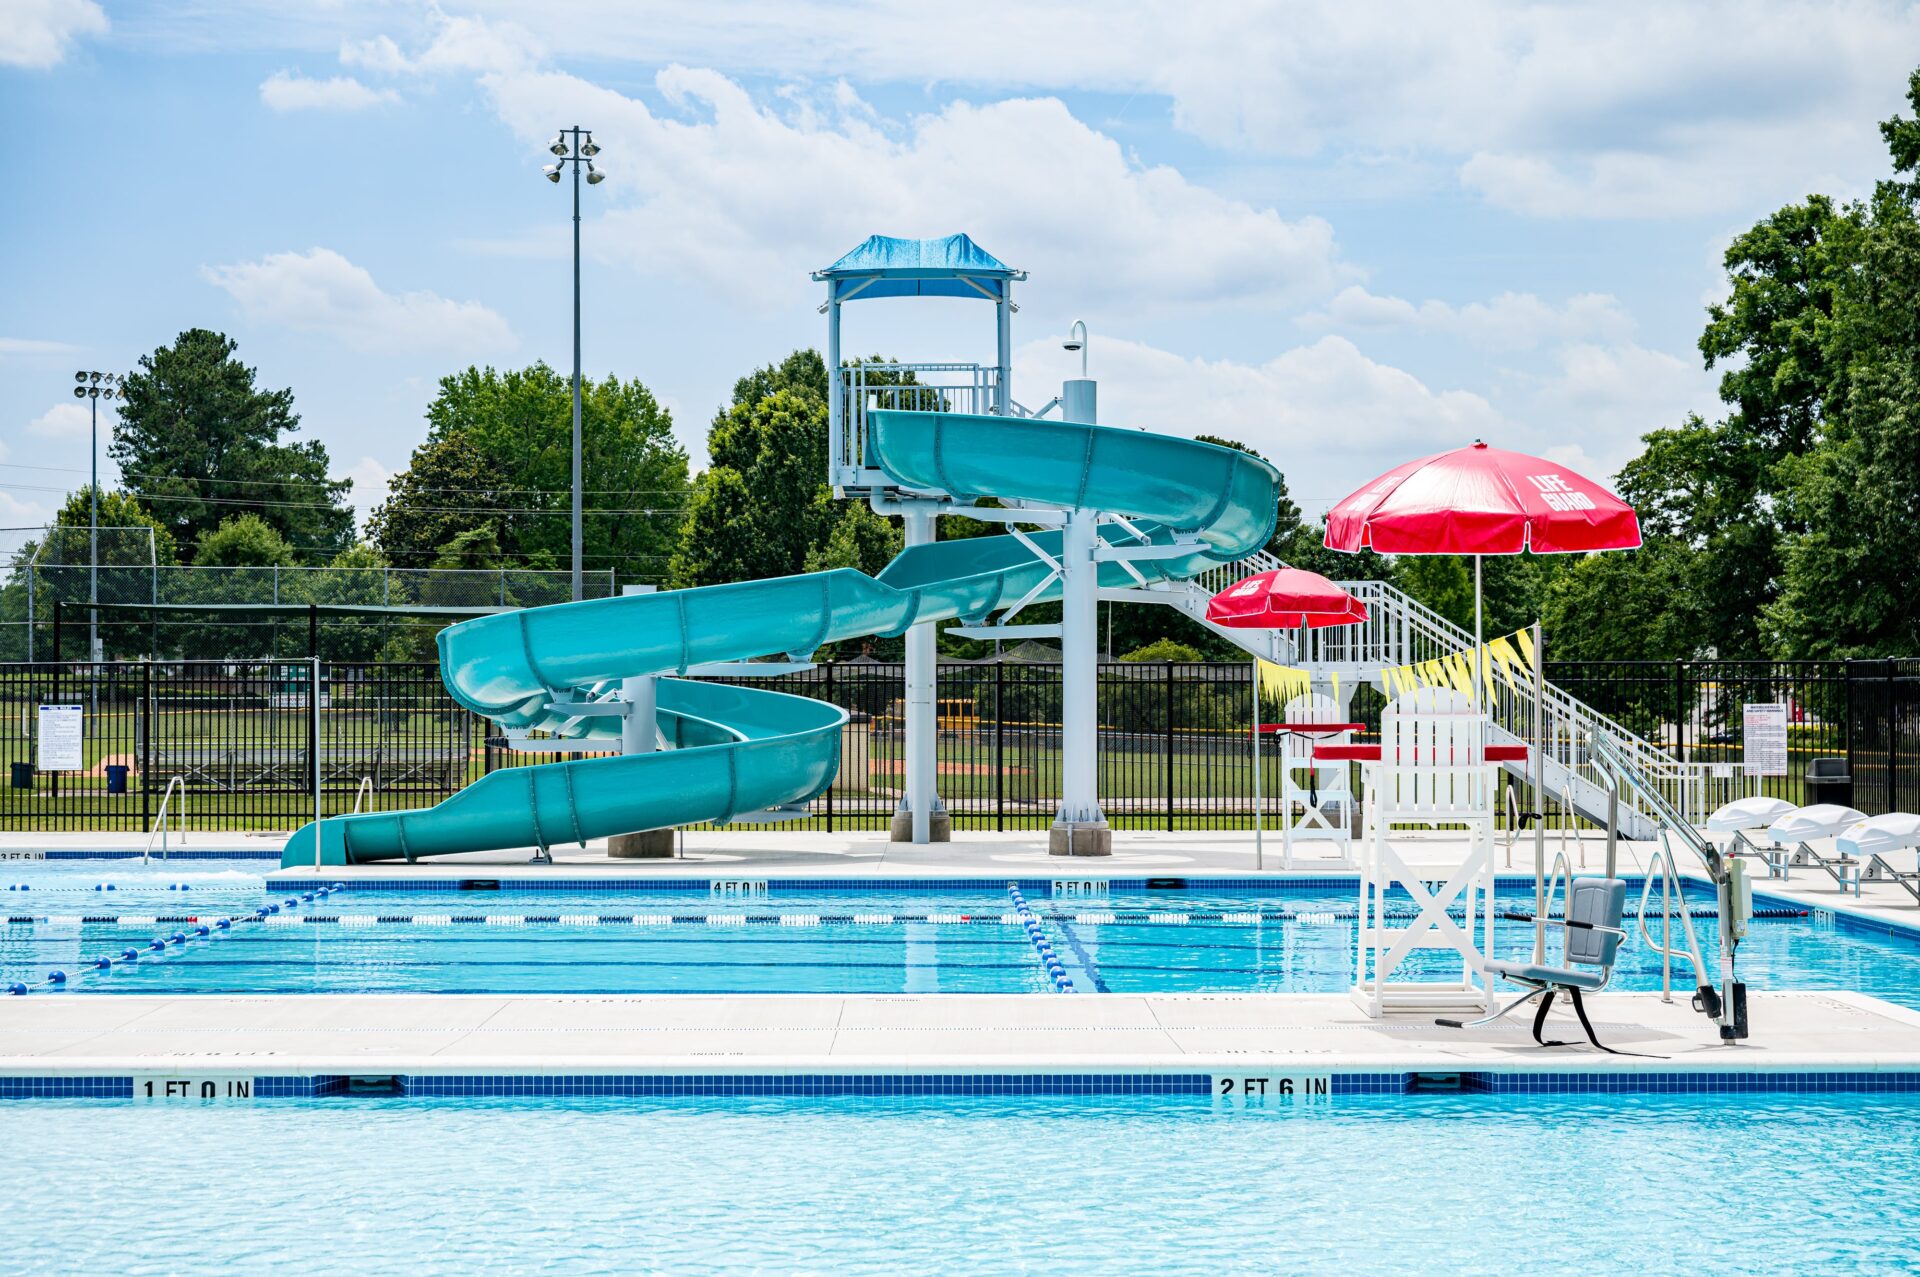 Outdoor aquatic center with ADA Pool Lifts and Lifeguard Chairs